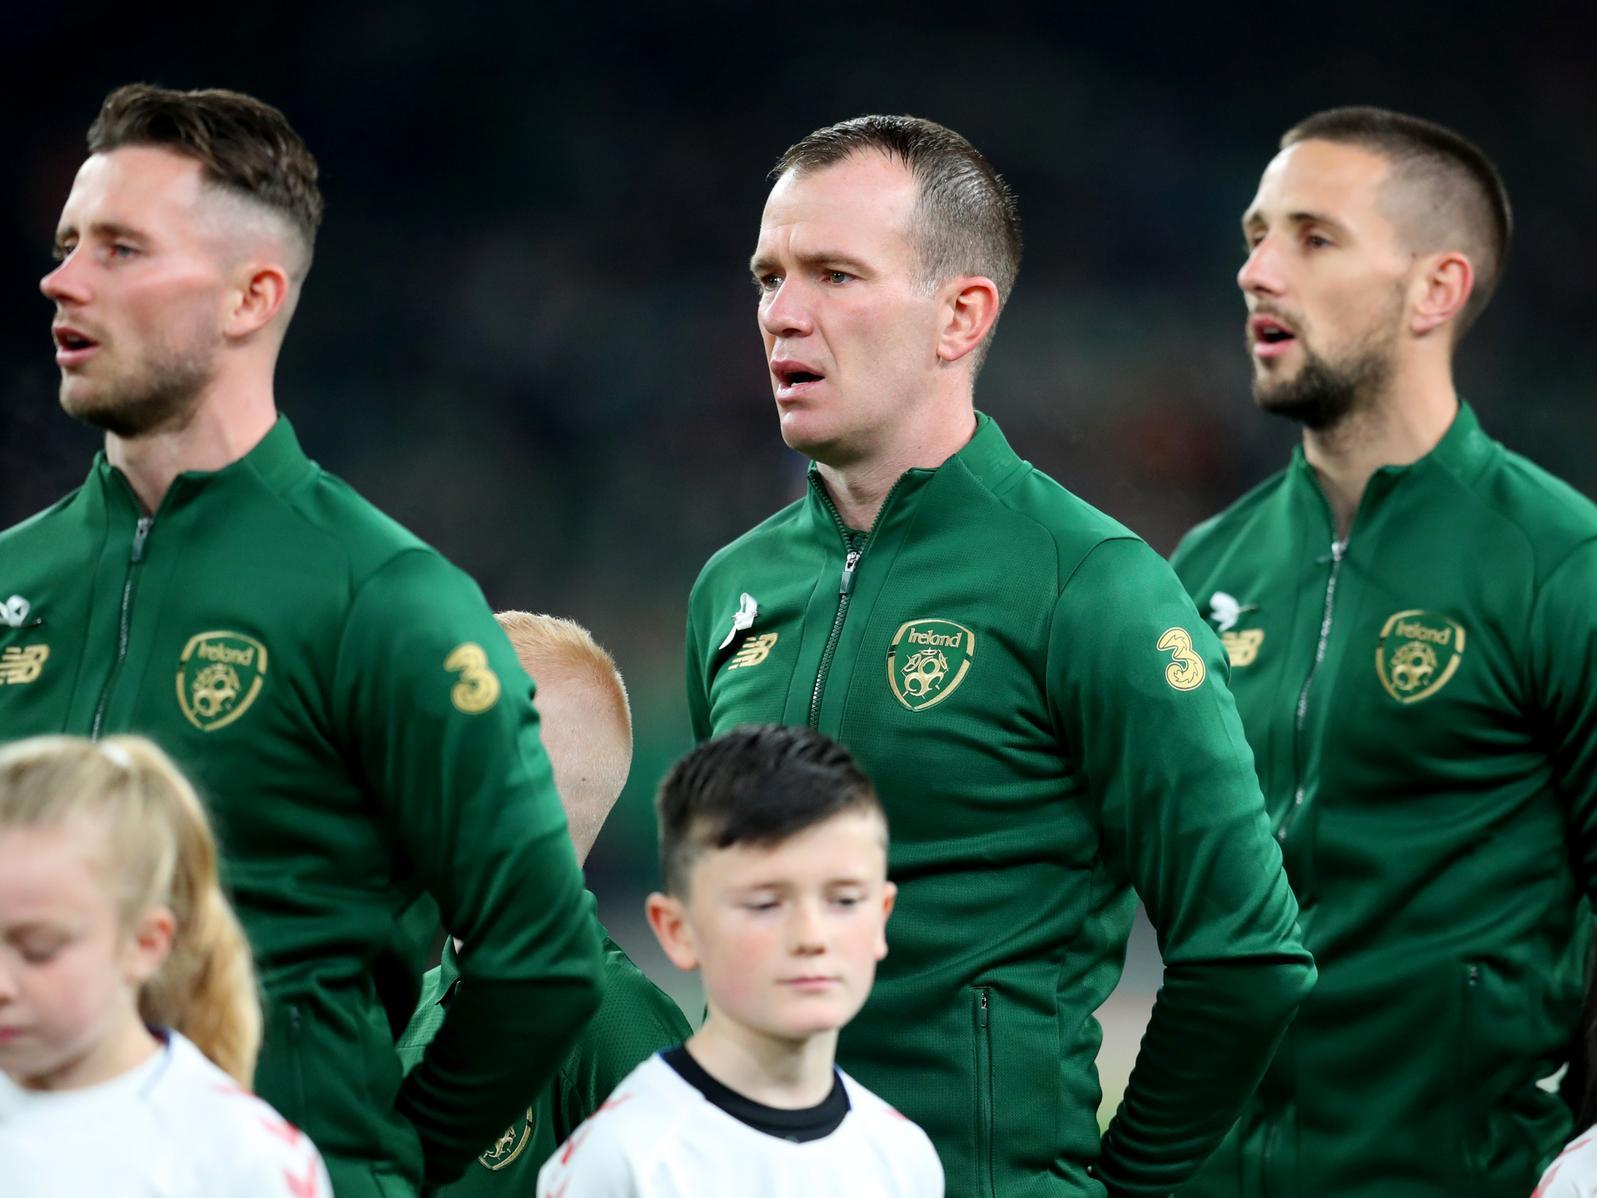 The 35-year-old Republic of Ireland international midfielder has something to prove after being frozen out by Daniel Stendel at Hearts. Has Premier League experience with Stoke and Aston Villa.